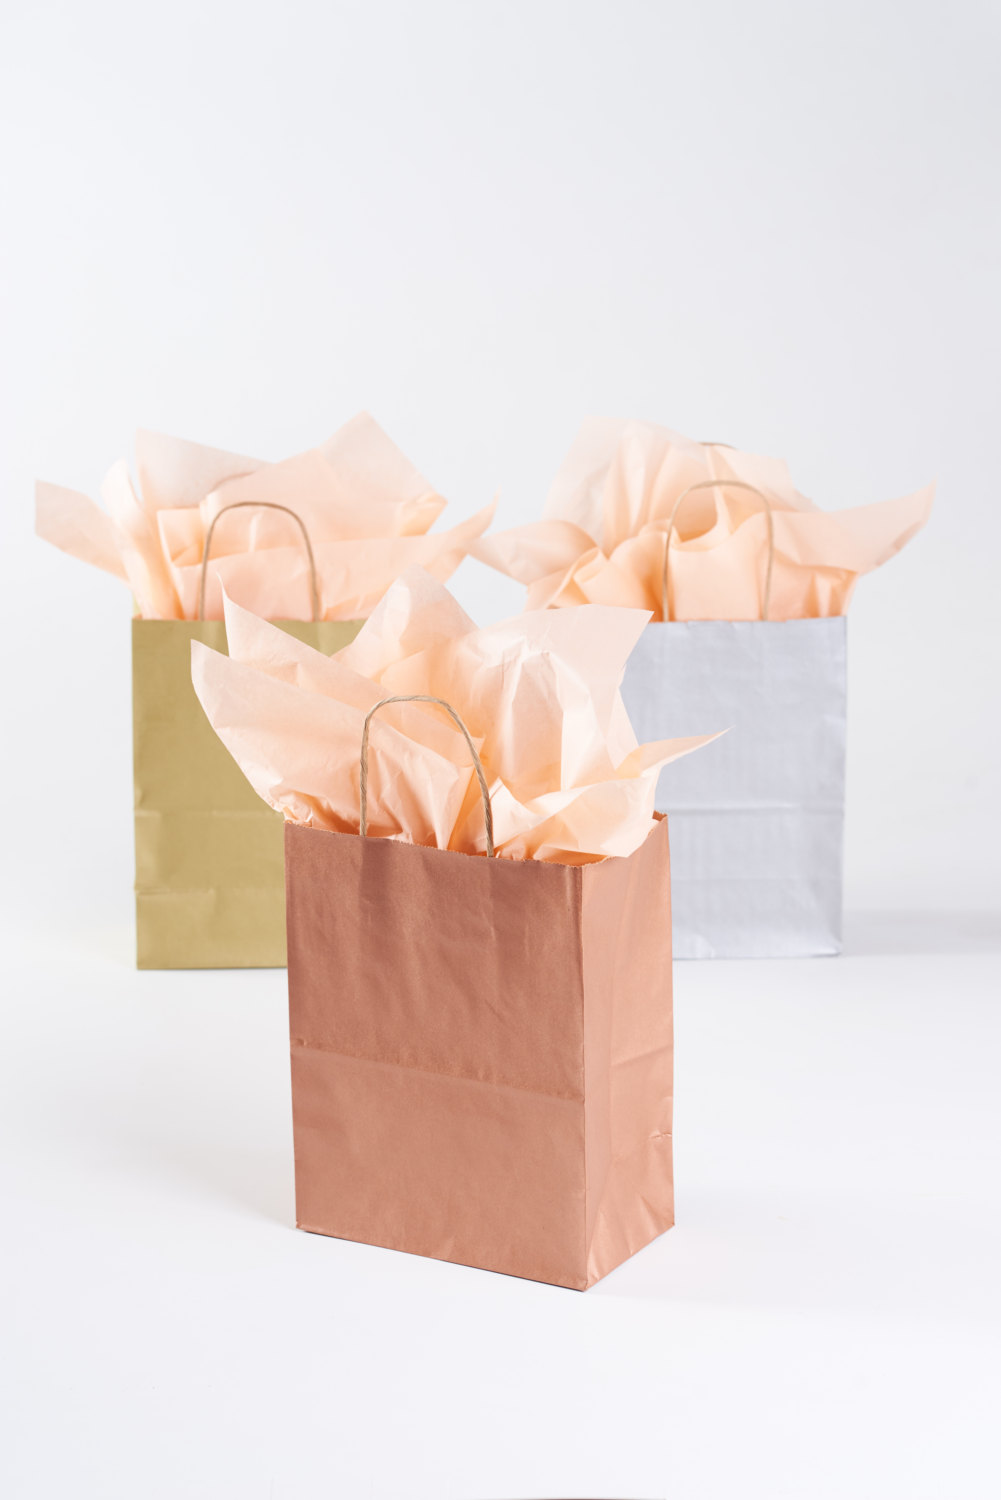 Are Wedding Guest Welcome Bags Really Necessary?